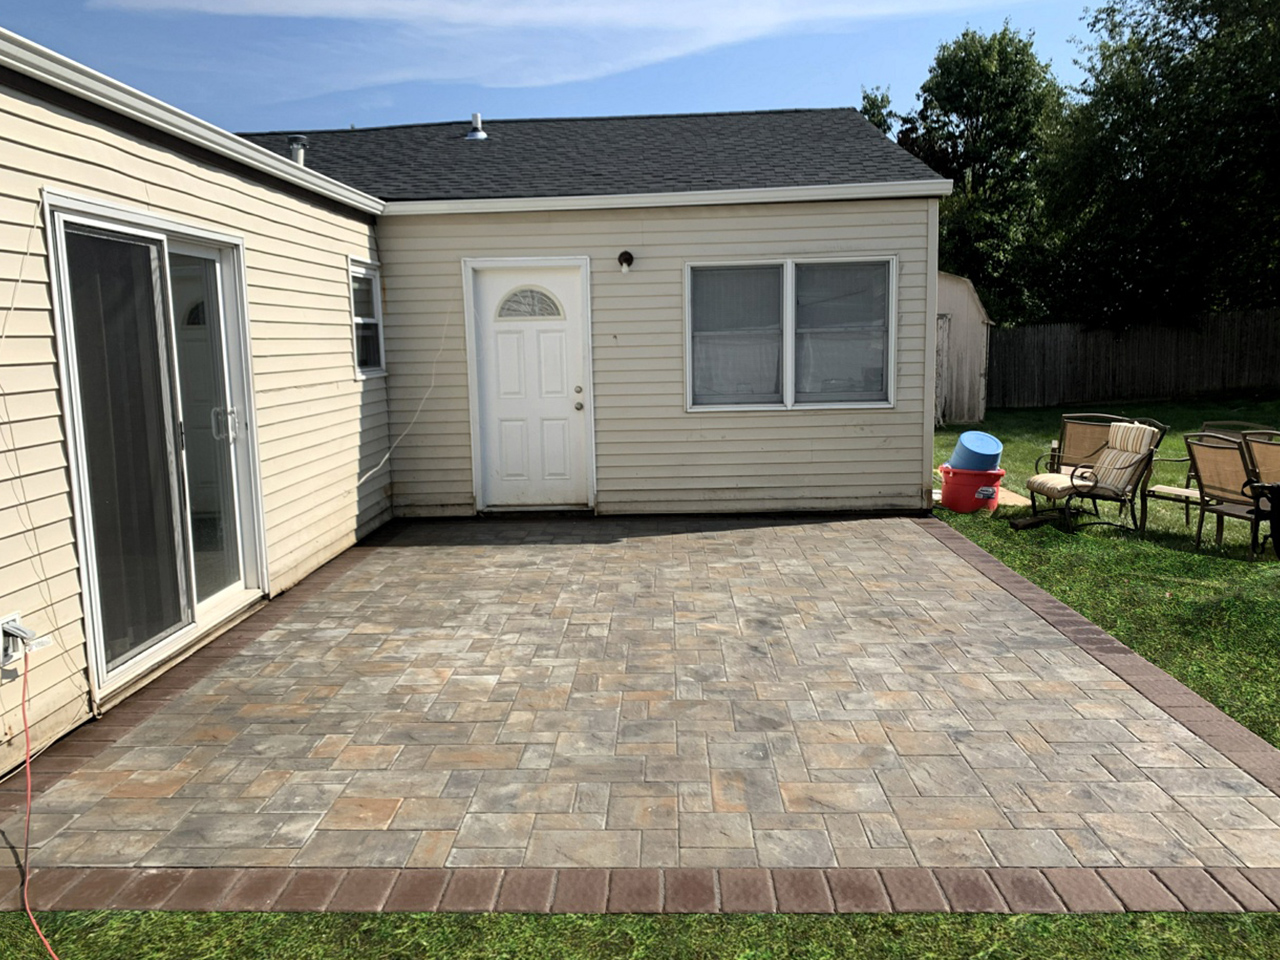 A timeless patio design by Affordable Patio, blending classic elements with modern touches for a balanced look